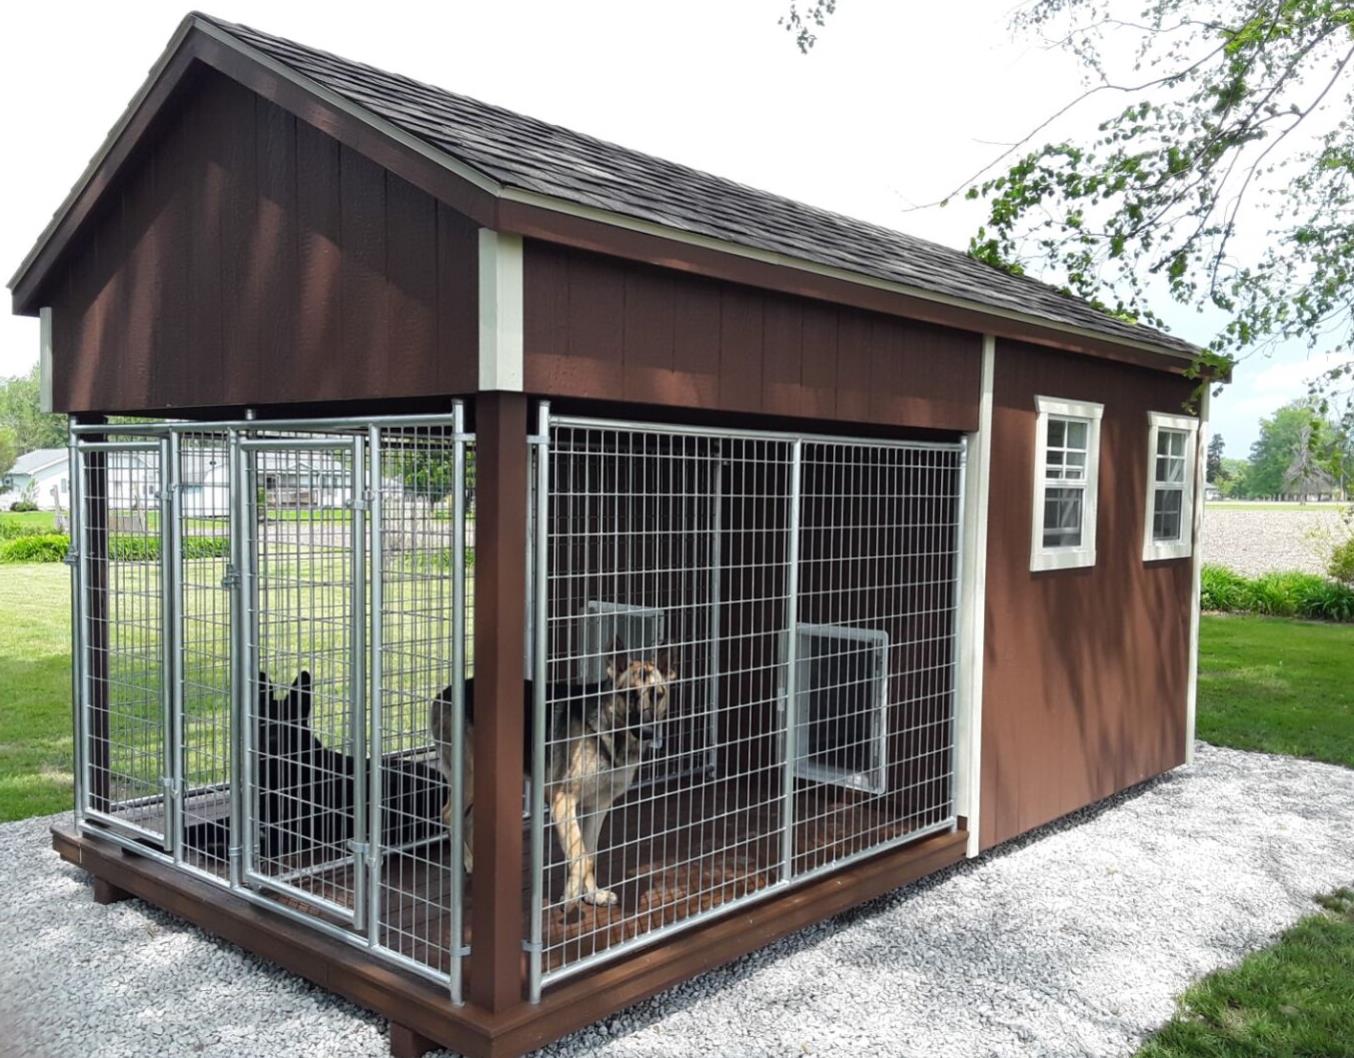 Exterior of an 8x16 two dog residential dog kennel with brown wood siding, white trim, gray asphalt roofing, 2 windows with white trim, and 2 German Shepherd dogs in 2 separate dog runs.